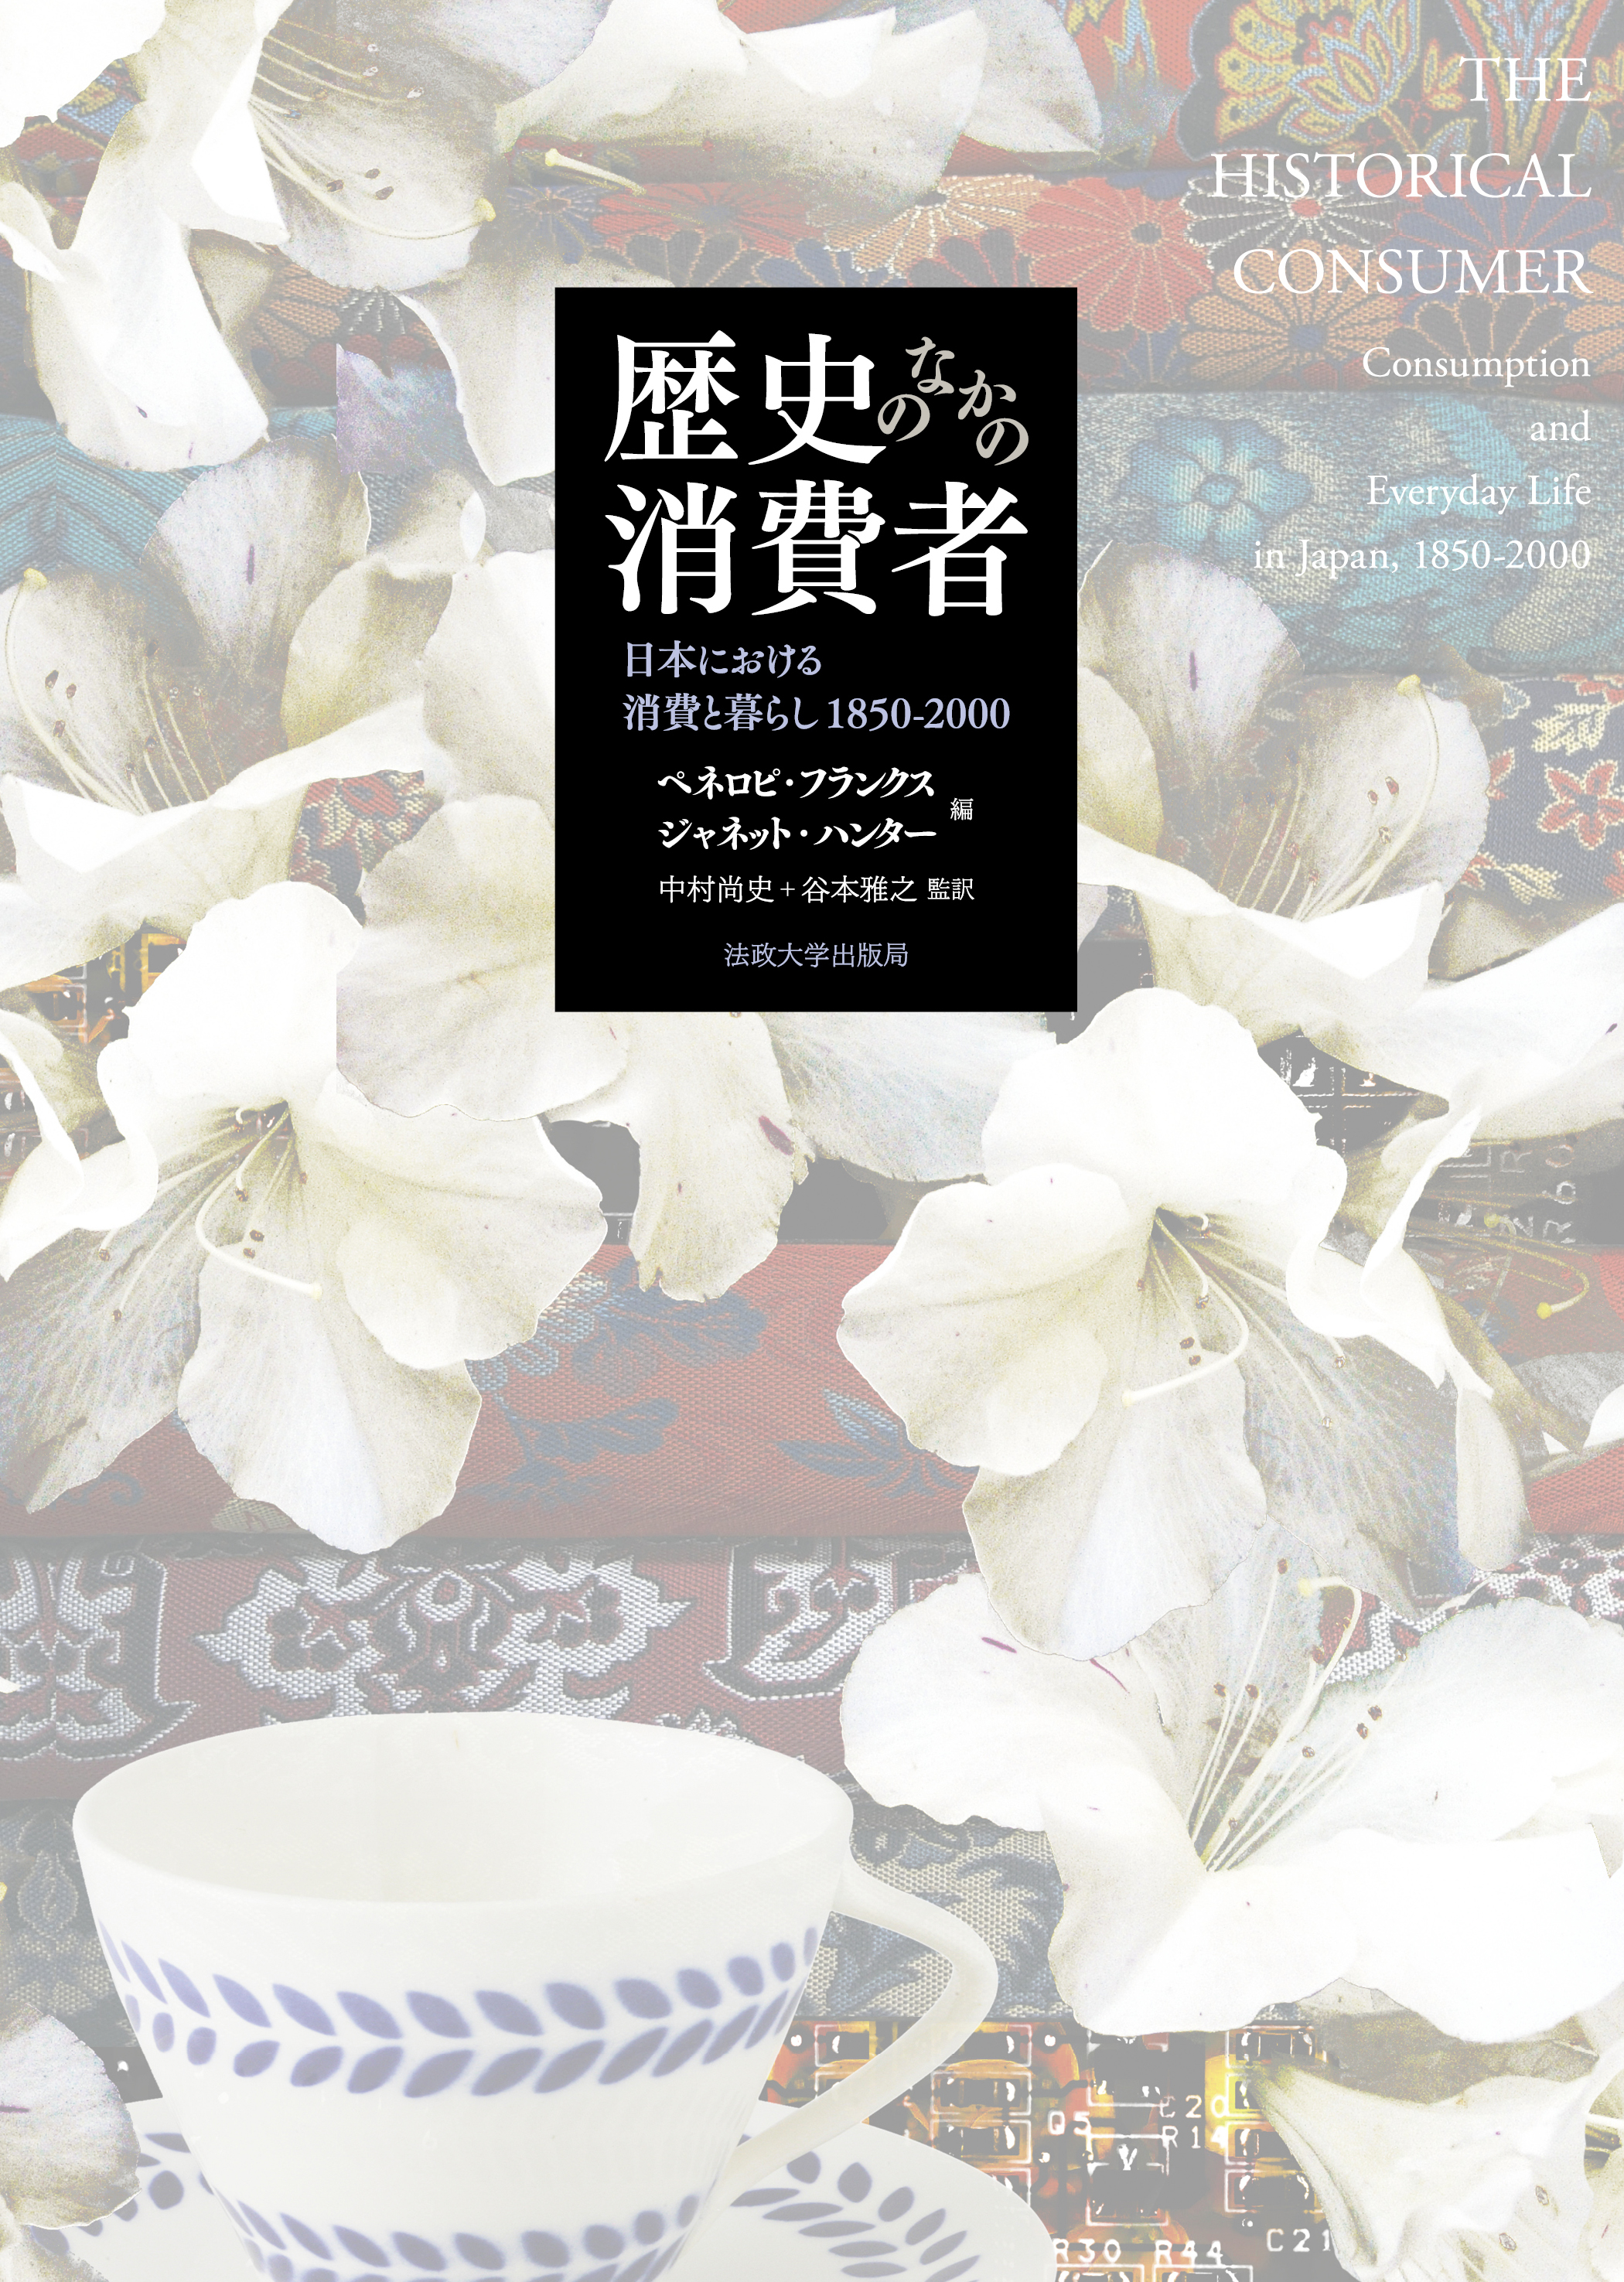 Cover with background of photographs of flowers, textiles, and tea utensils